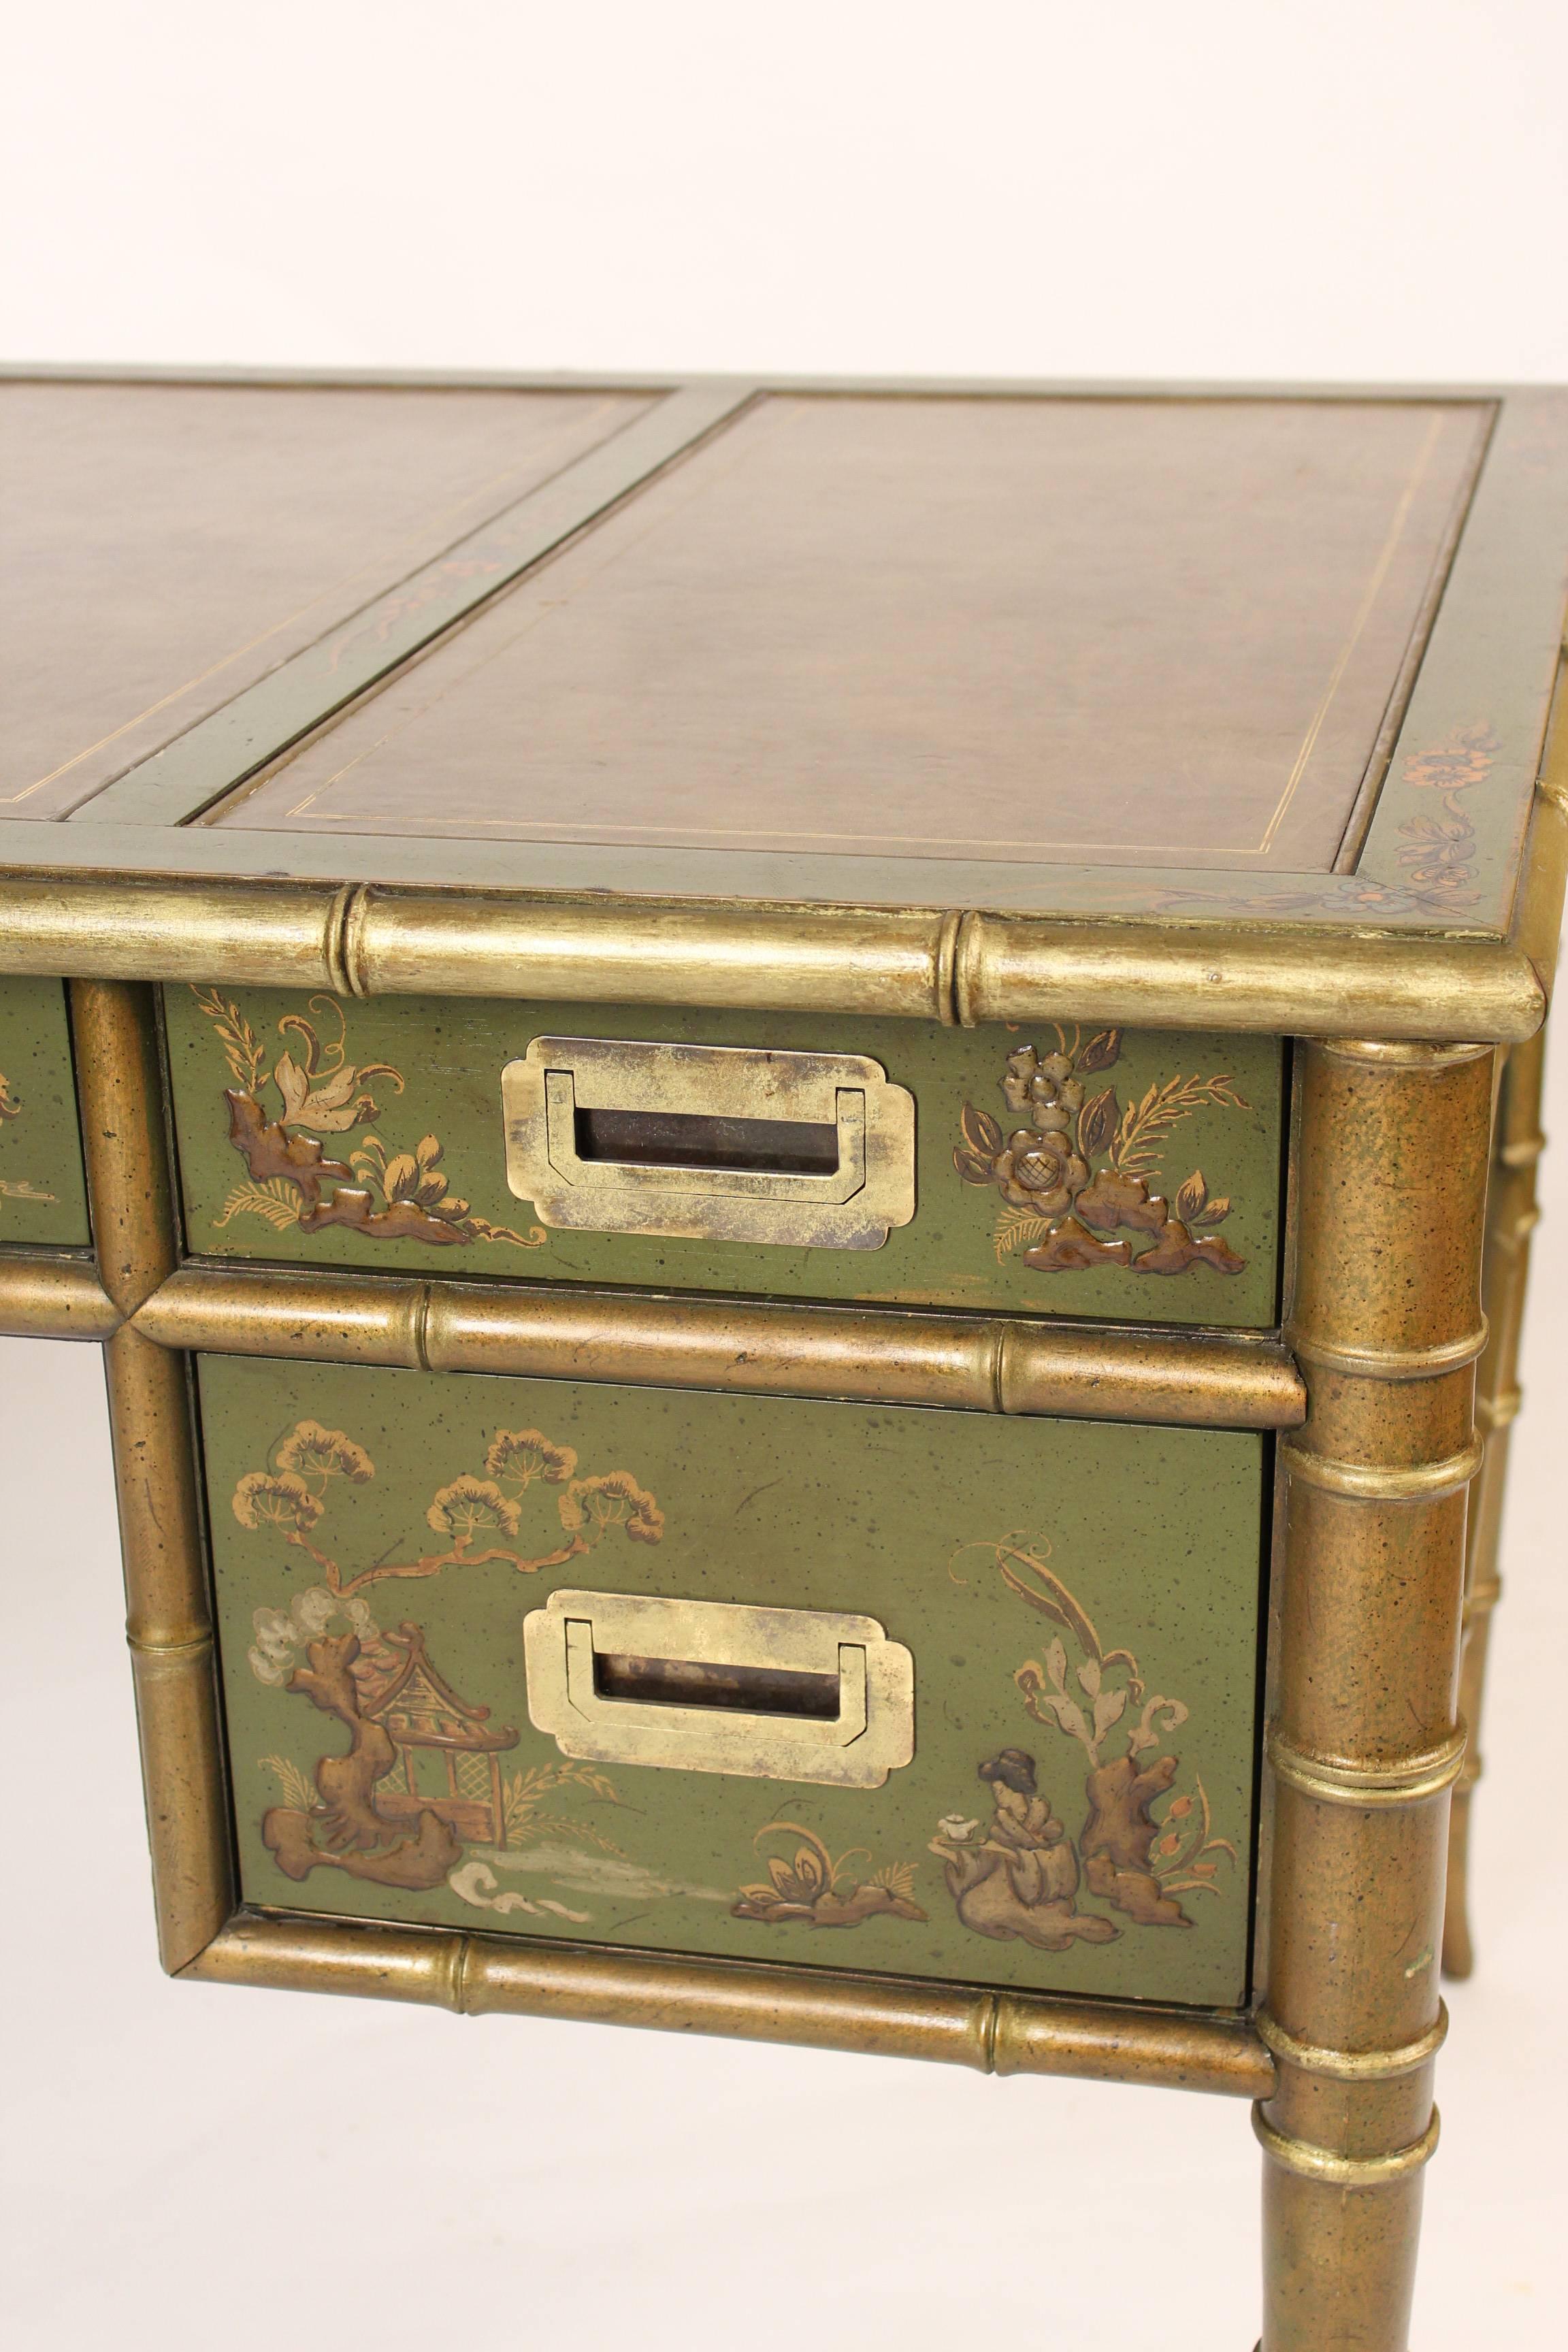 North American English Regency Style Chinoiserie Decorated Desk